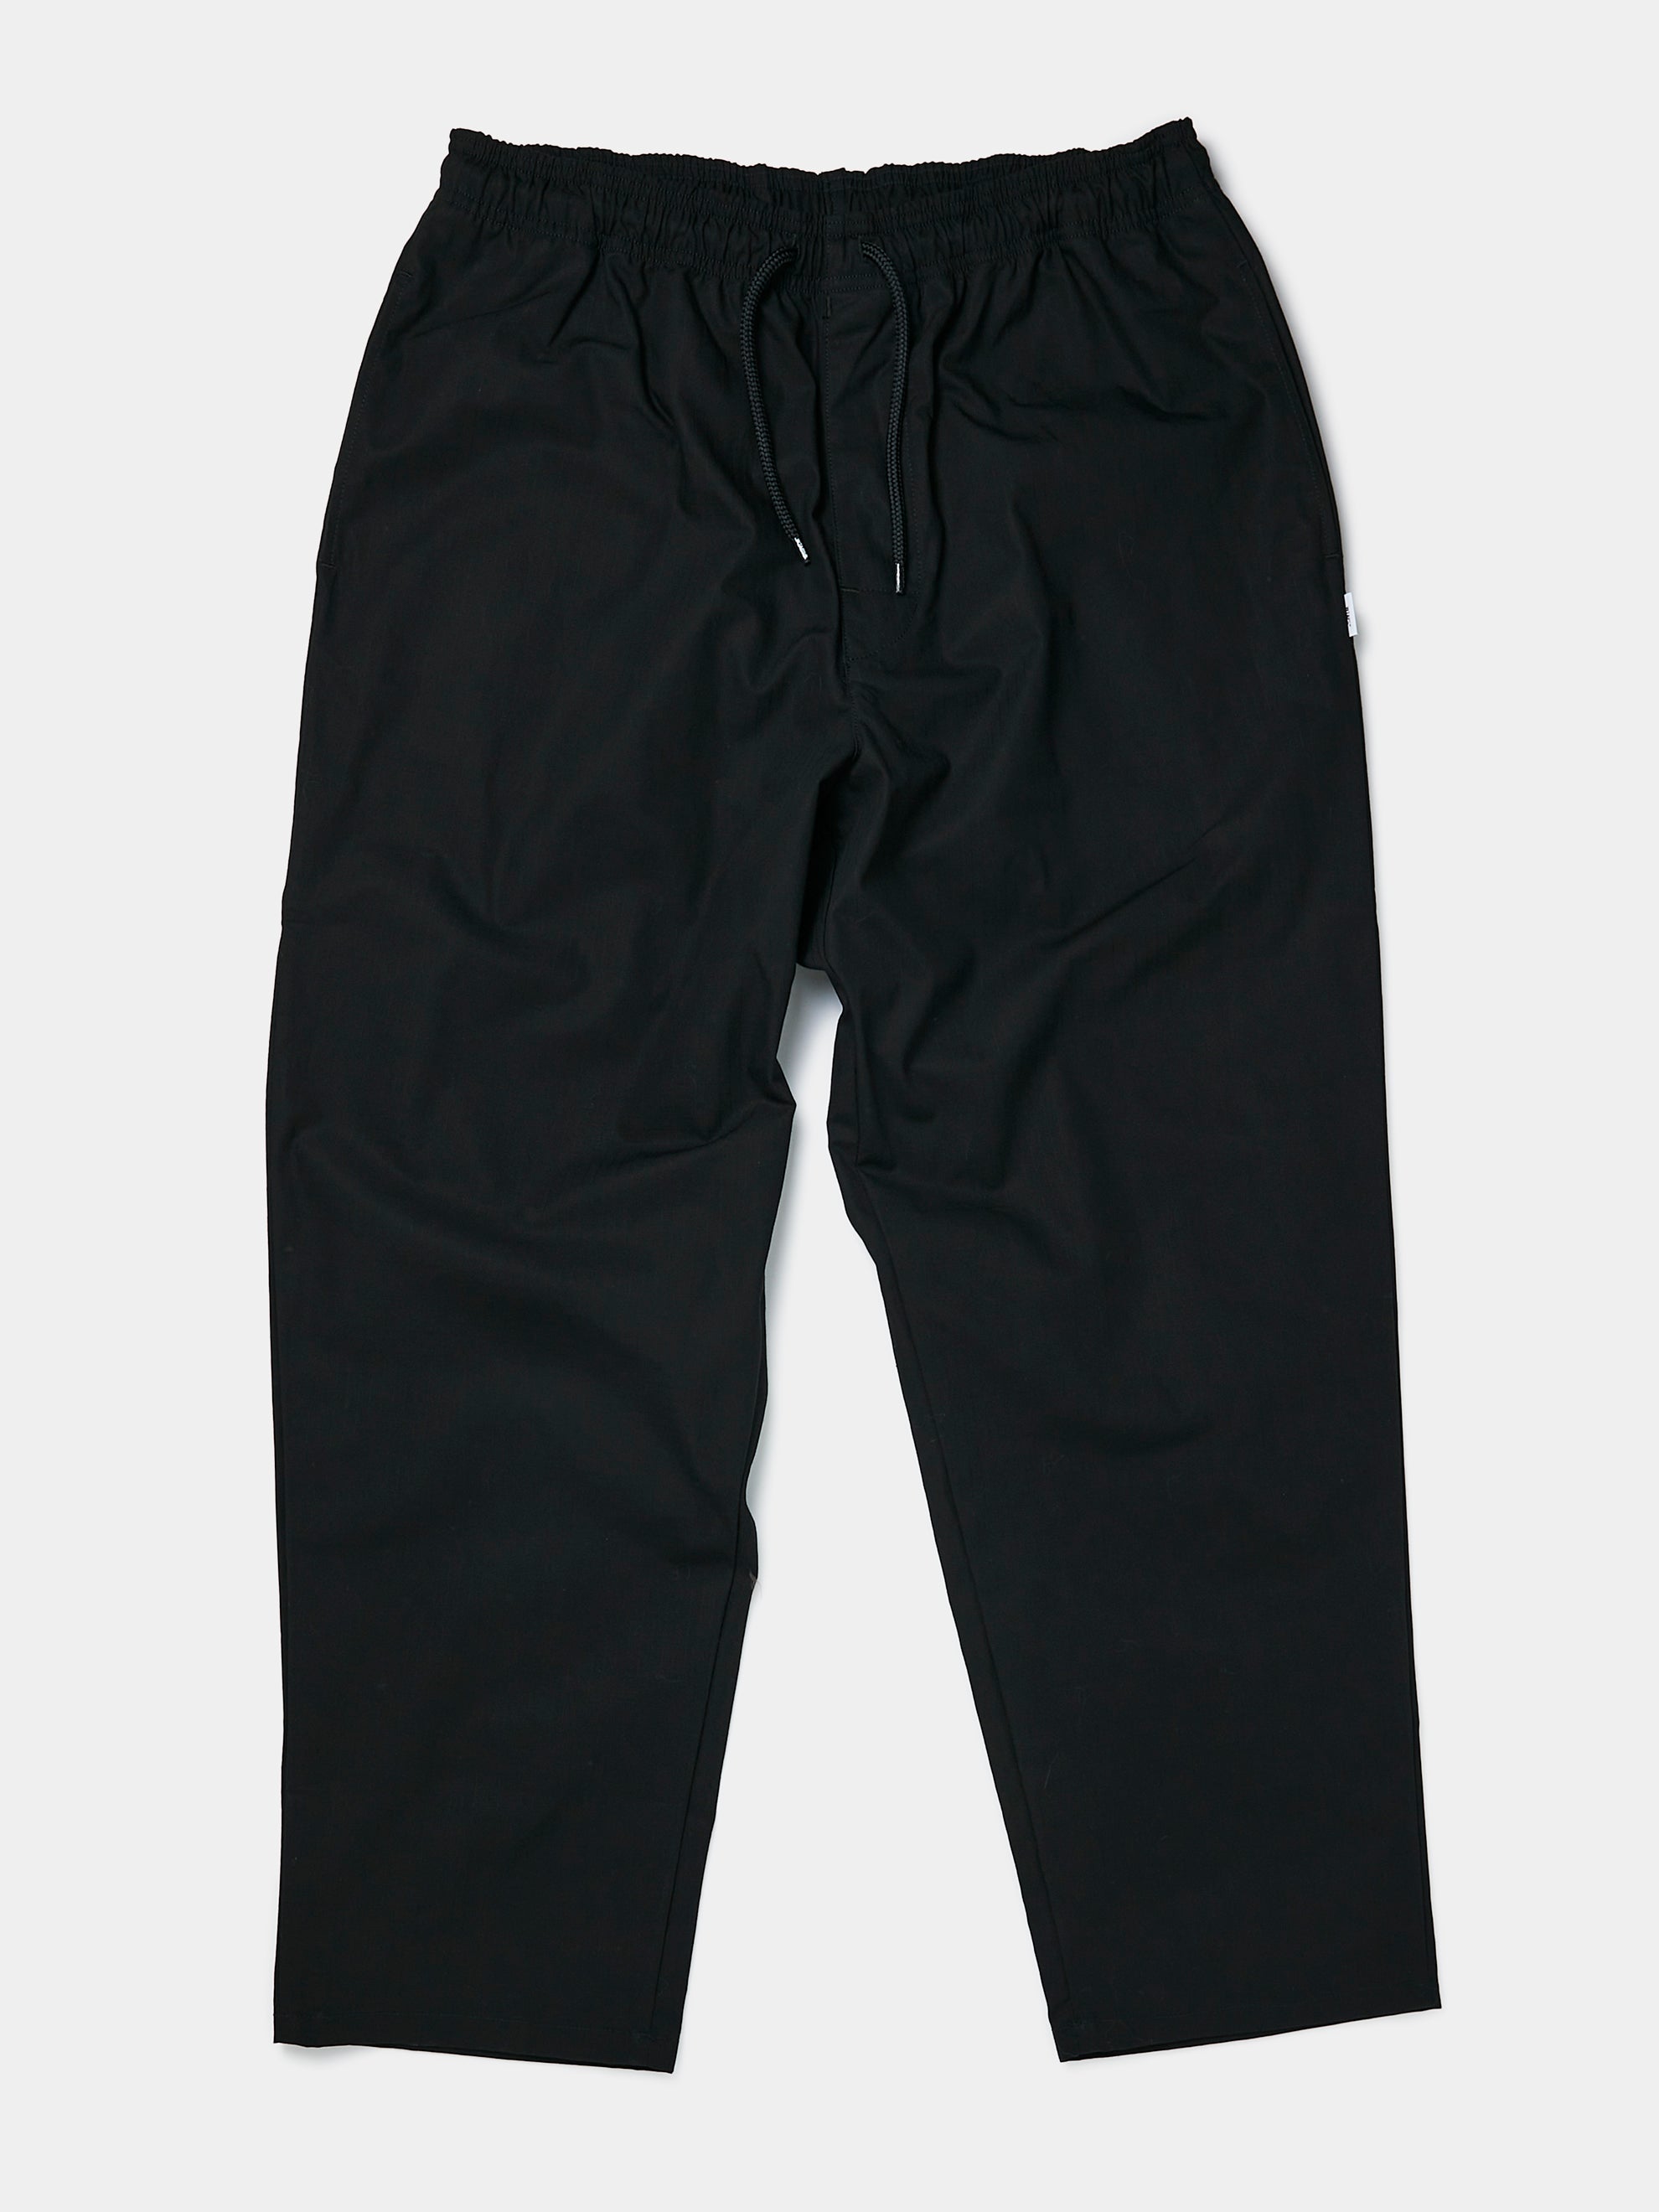 Buy Wtaps SDDT / TROUSERS / COTTON RIPSTOP BLACK Online at